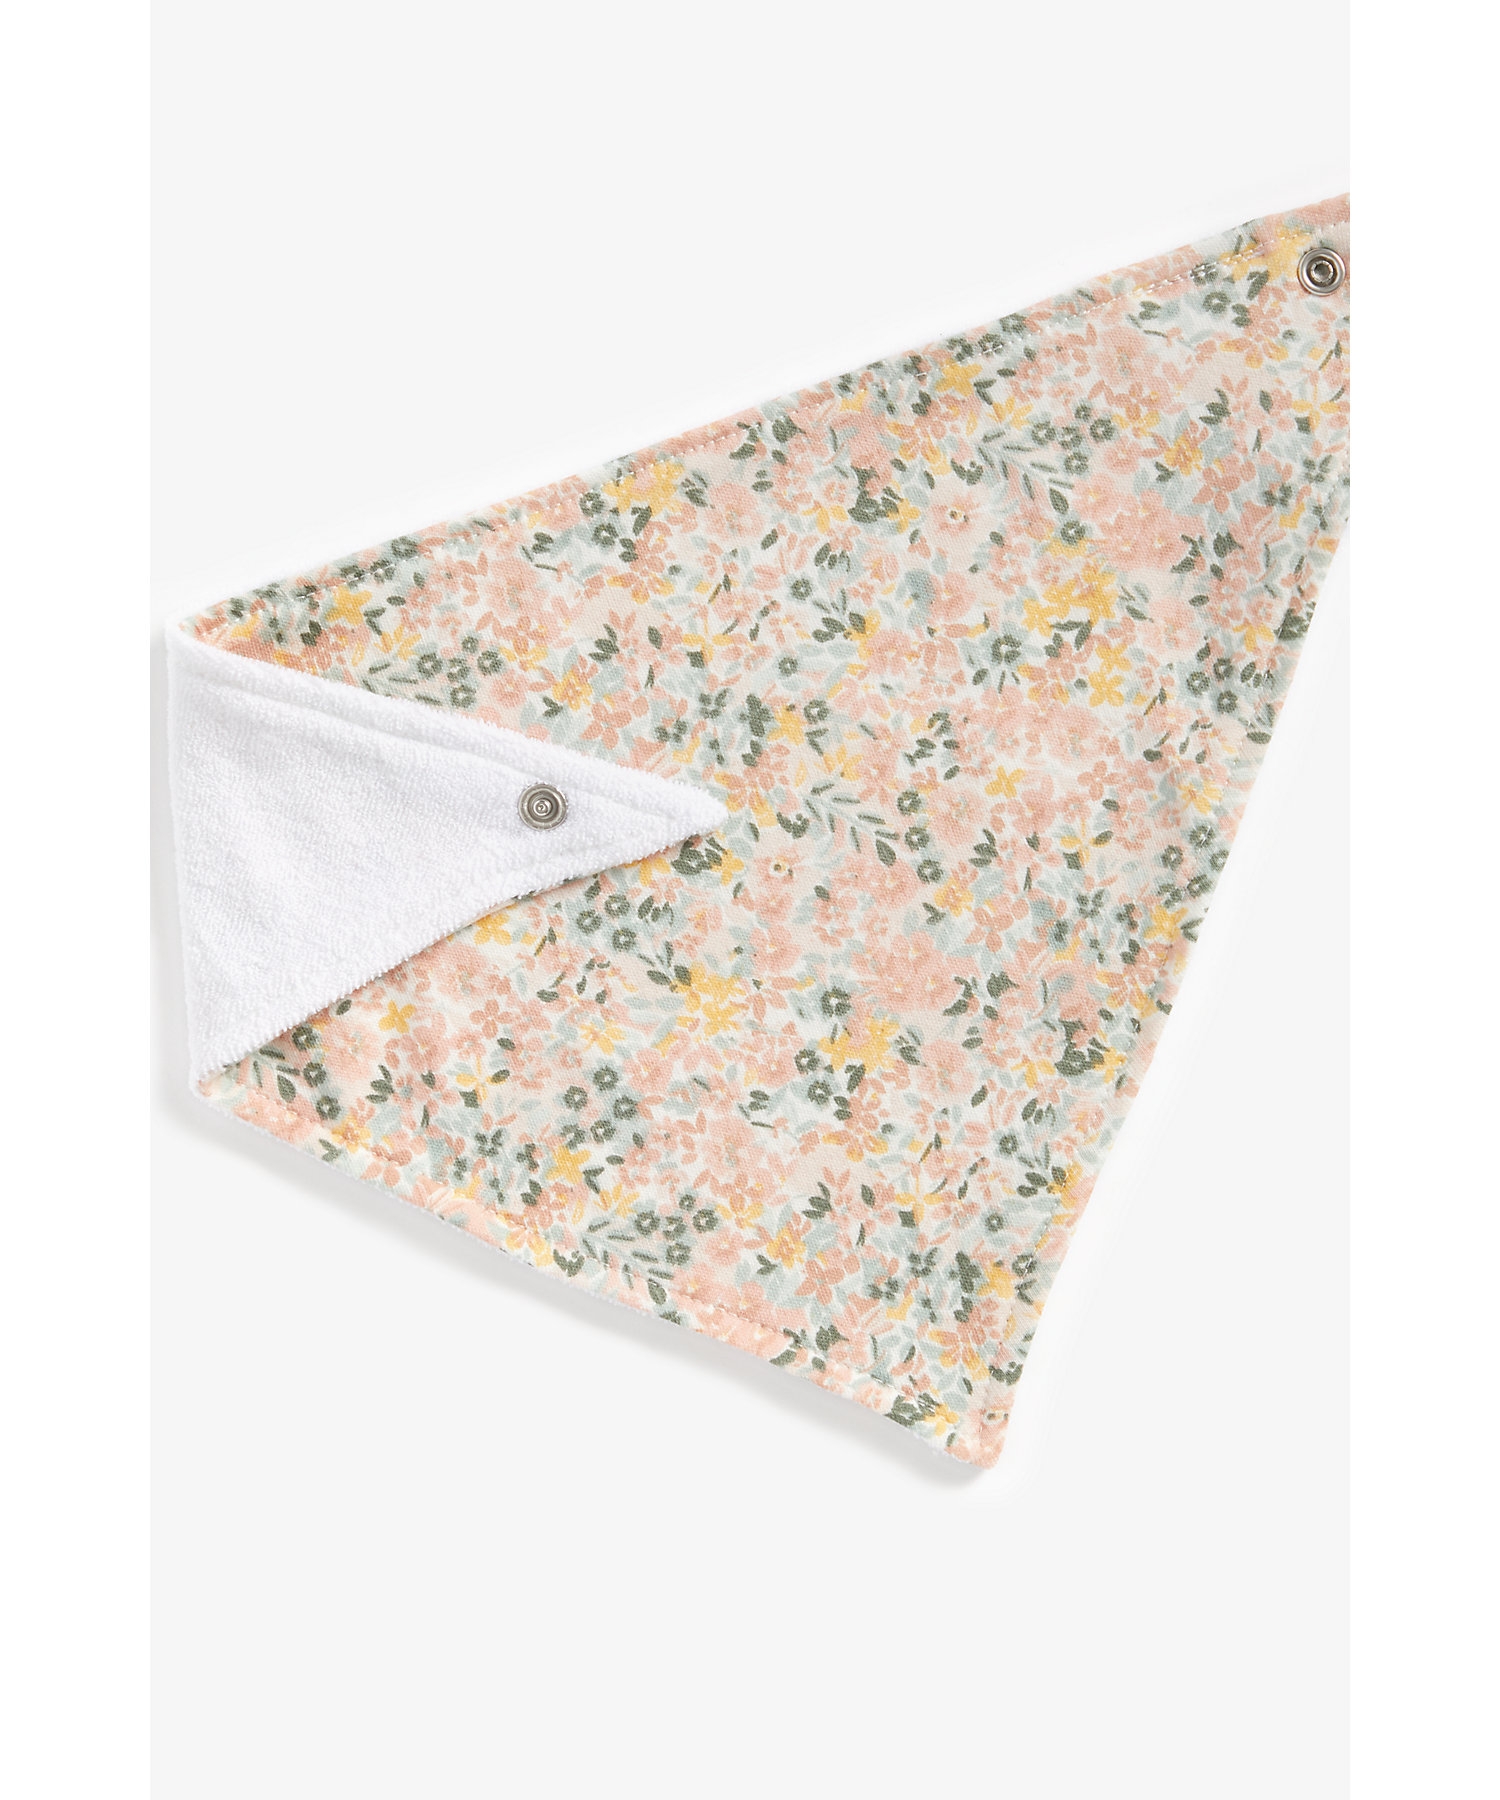 Mothercare | Girls Bibs Spot And Floral Print - Pack Of 3 - Multicolor 4